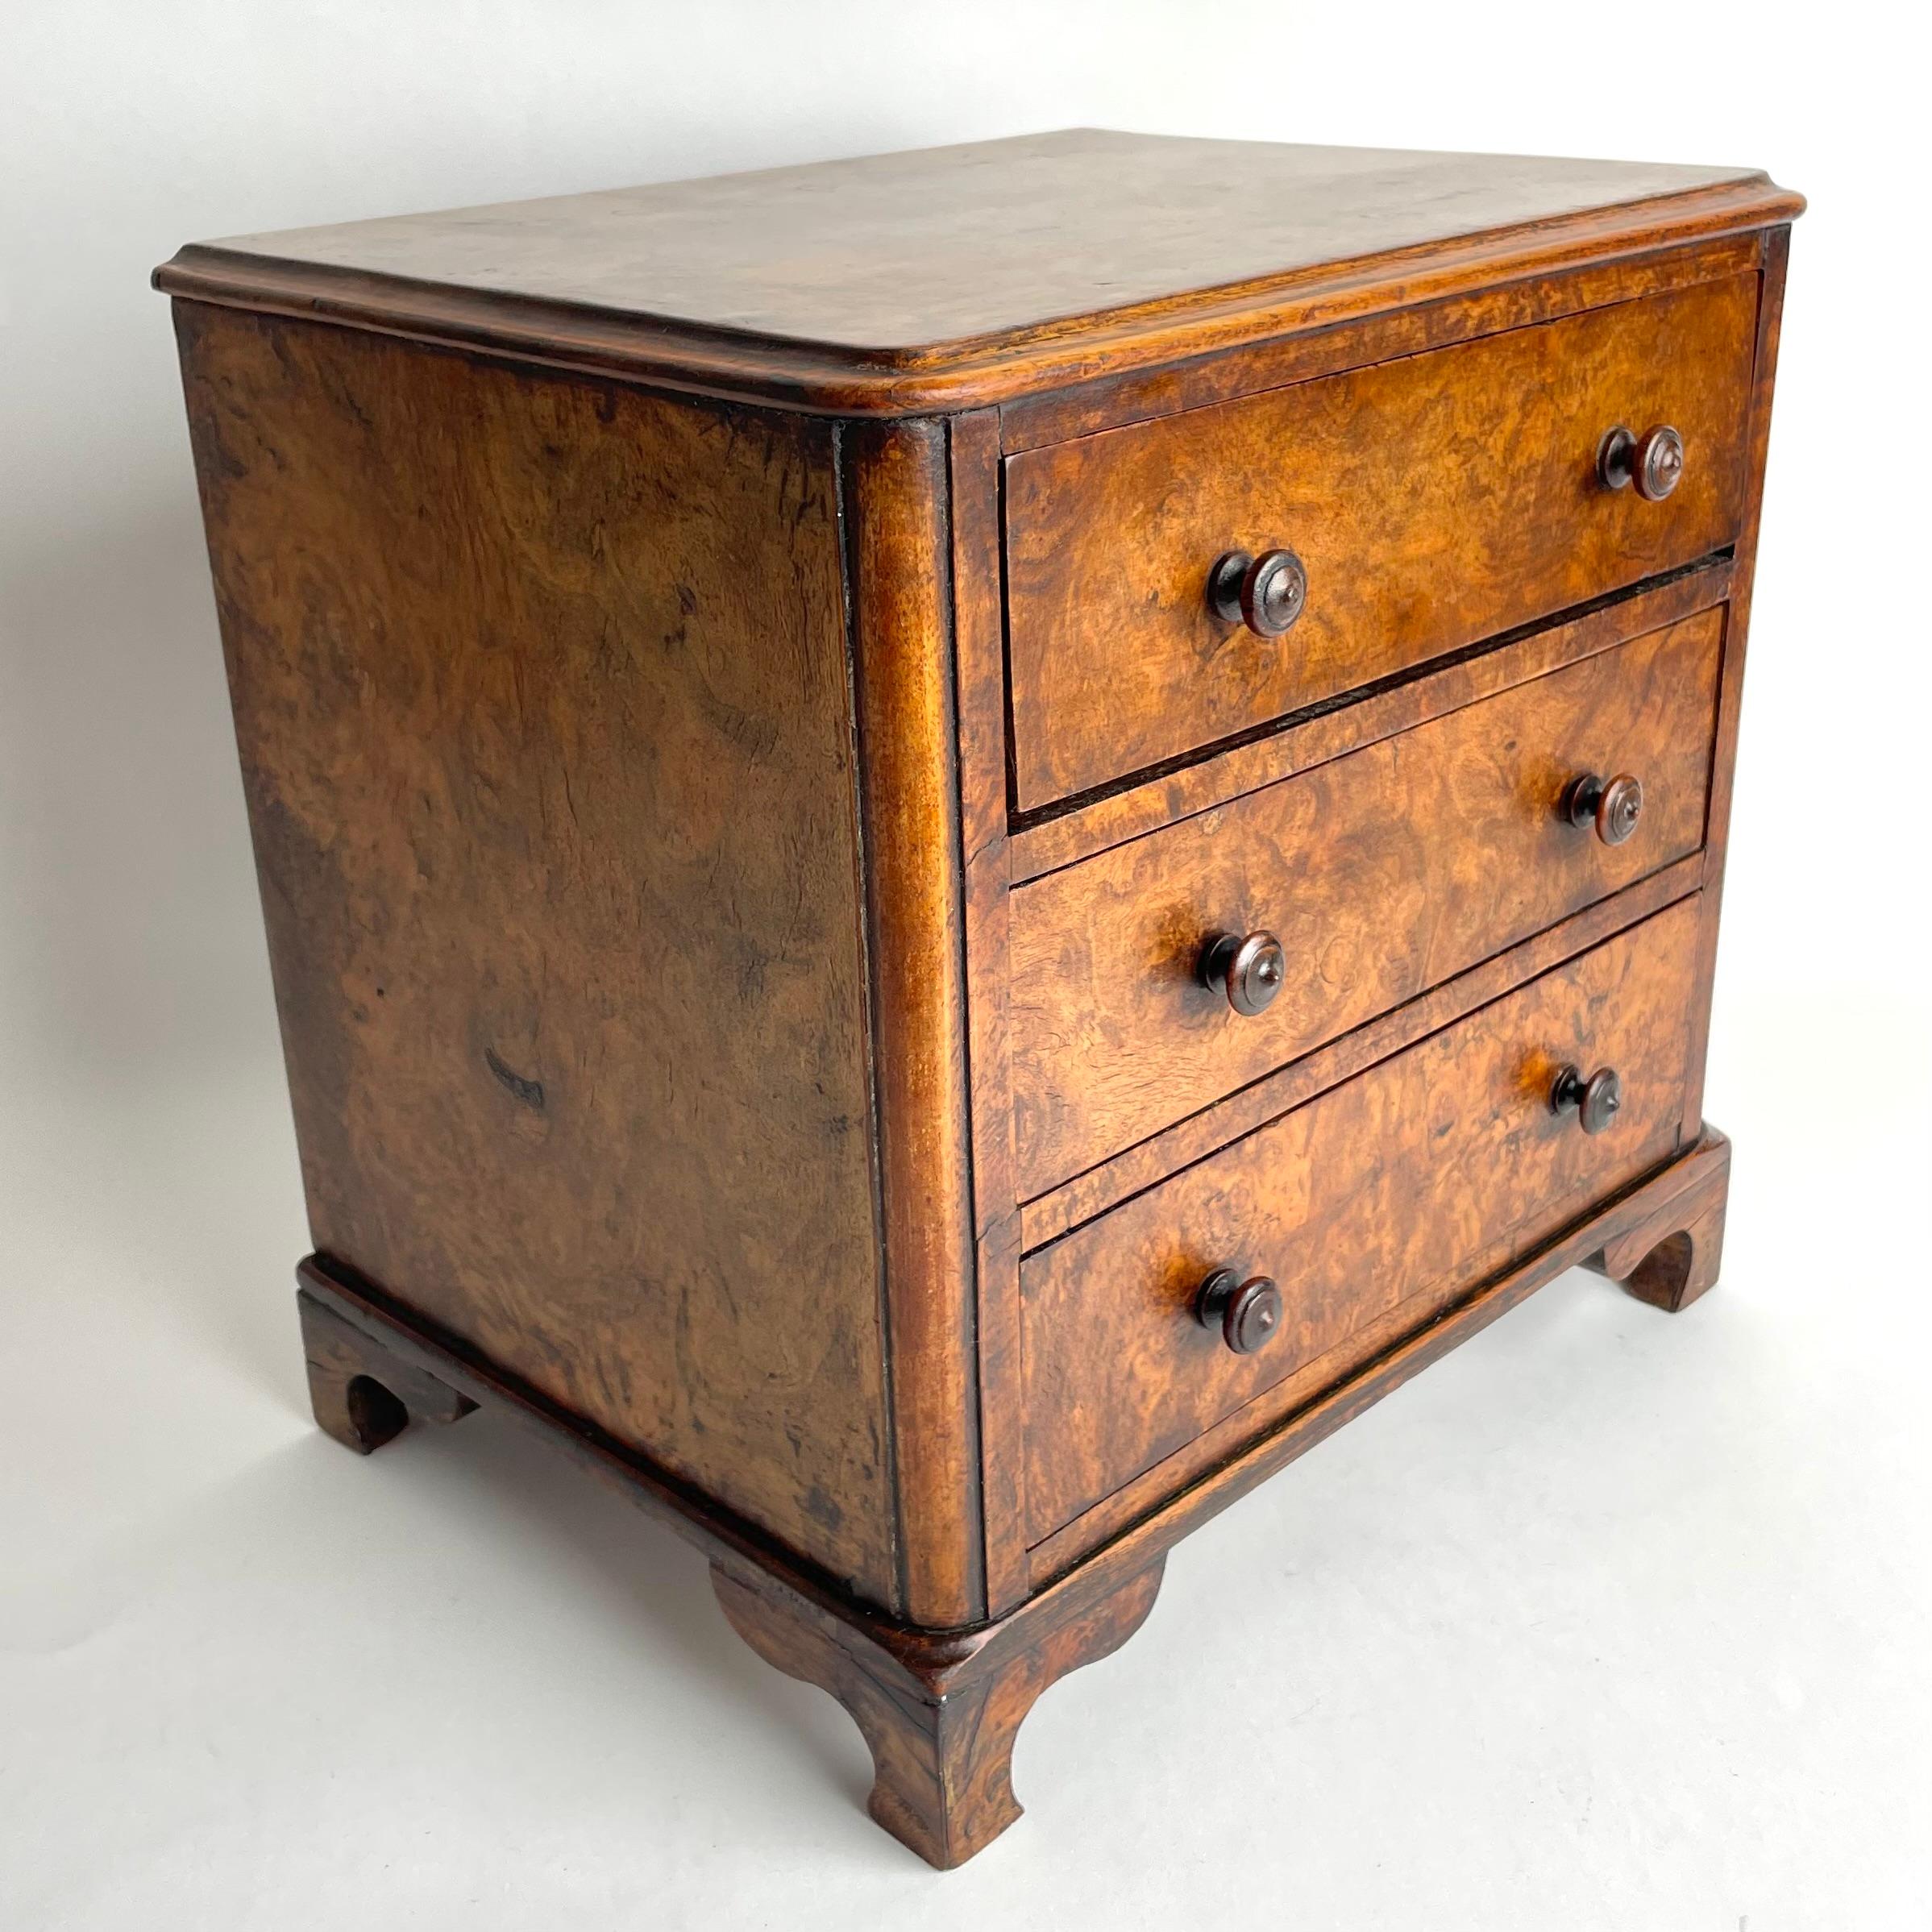 Elegant English miniature chest of drawers in walnut burl from Mid-19th Century. 

Perfect as a jewelry or collector’s box.

Wear consistent with age and use 